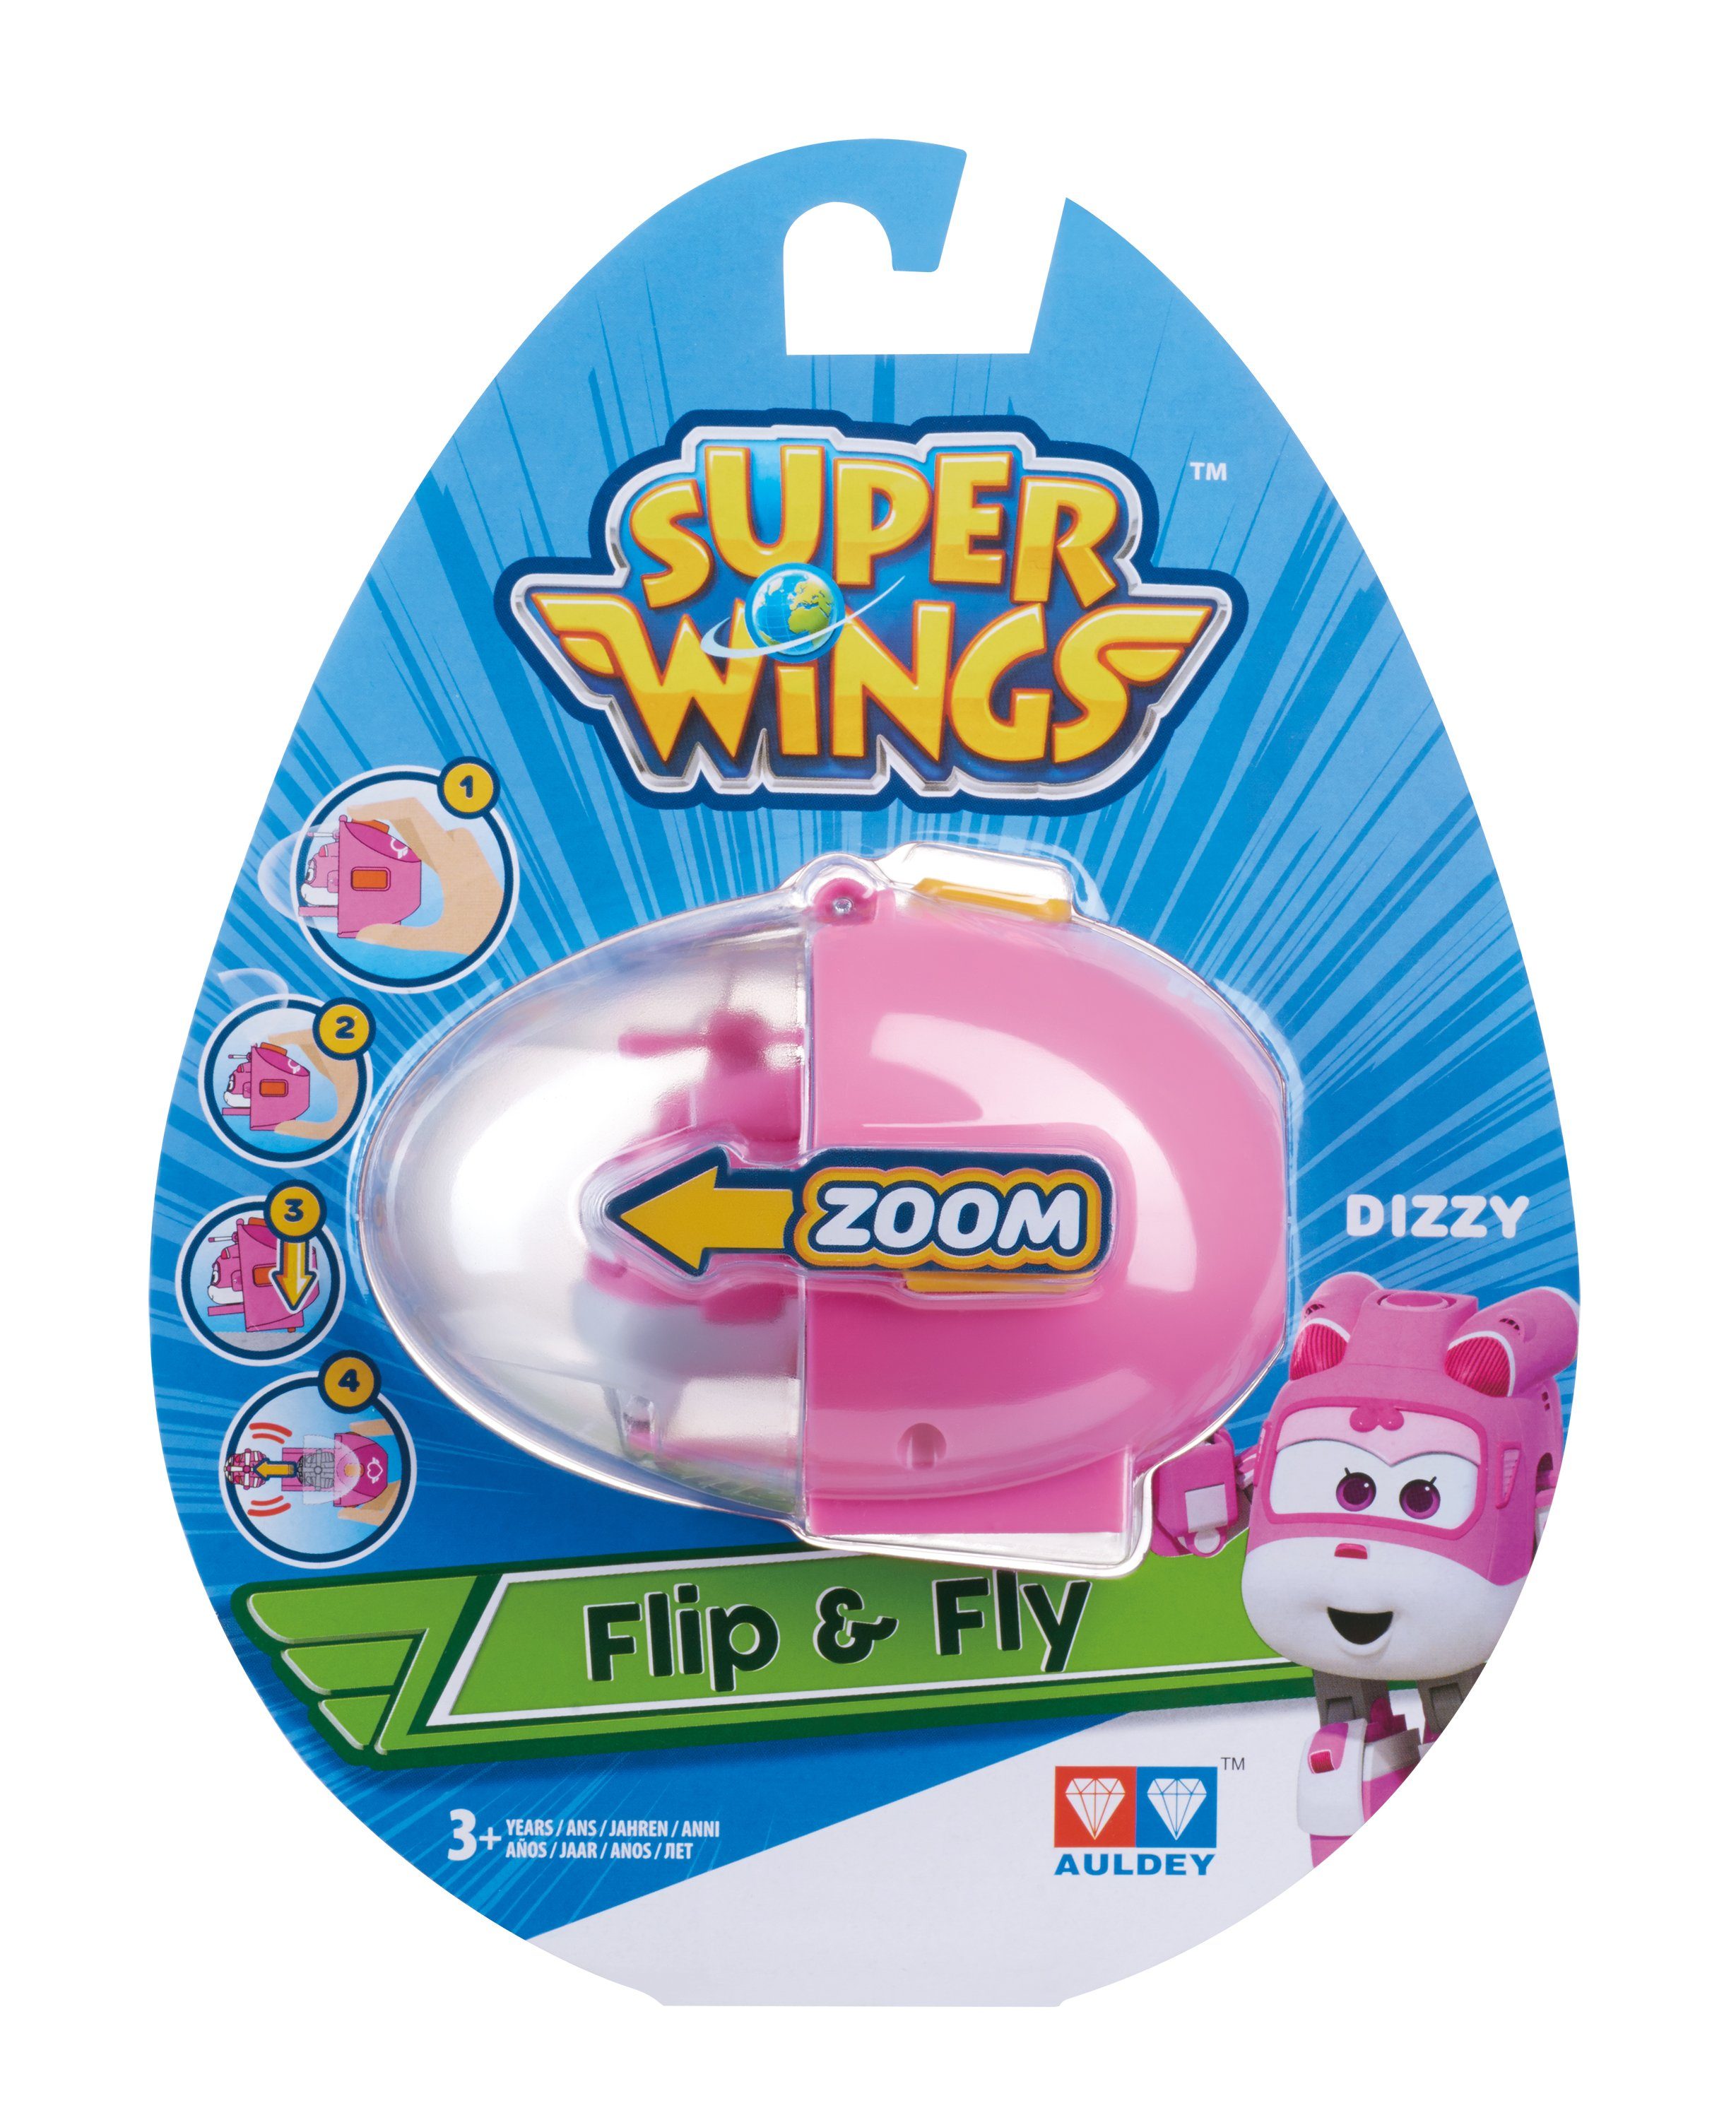 Flip Super Dizzy, Actionfigur (Packung) Wings n VaGo-Tools - Vago®-Toys Fly